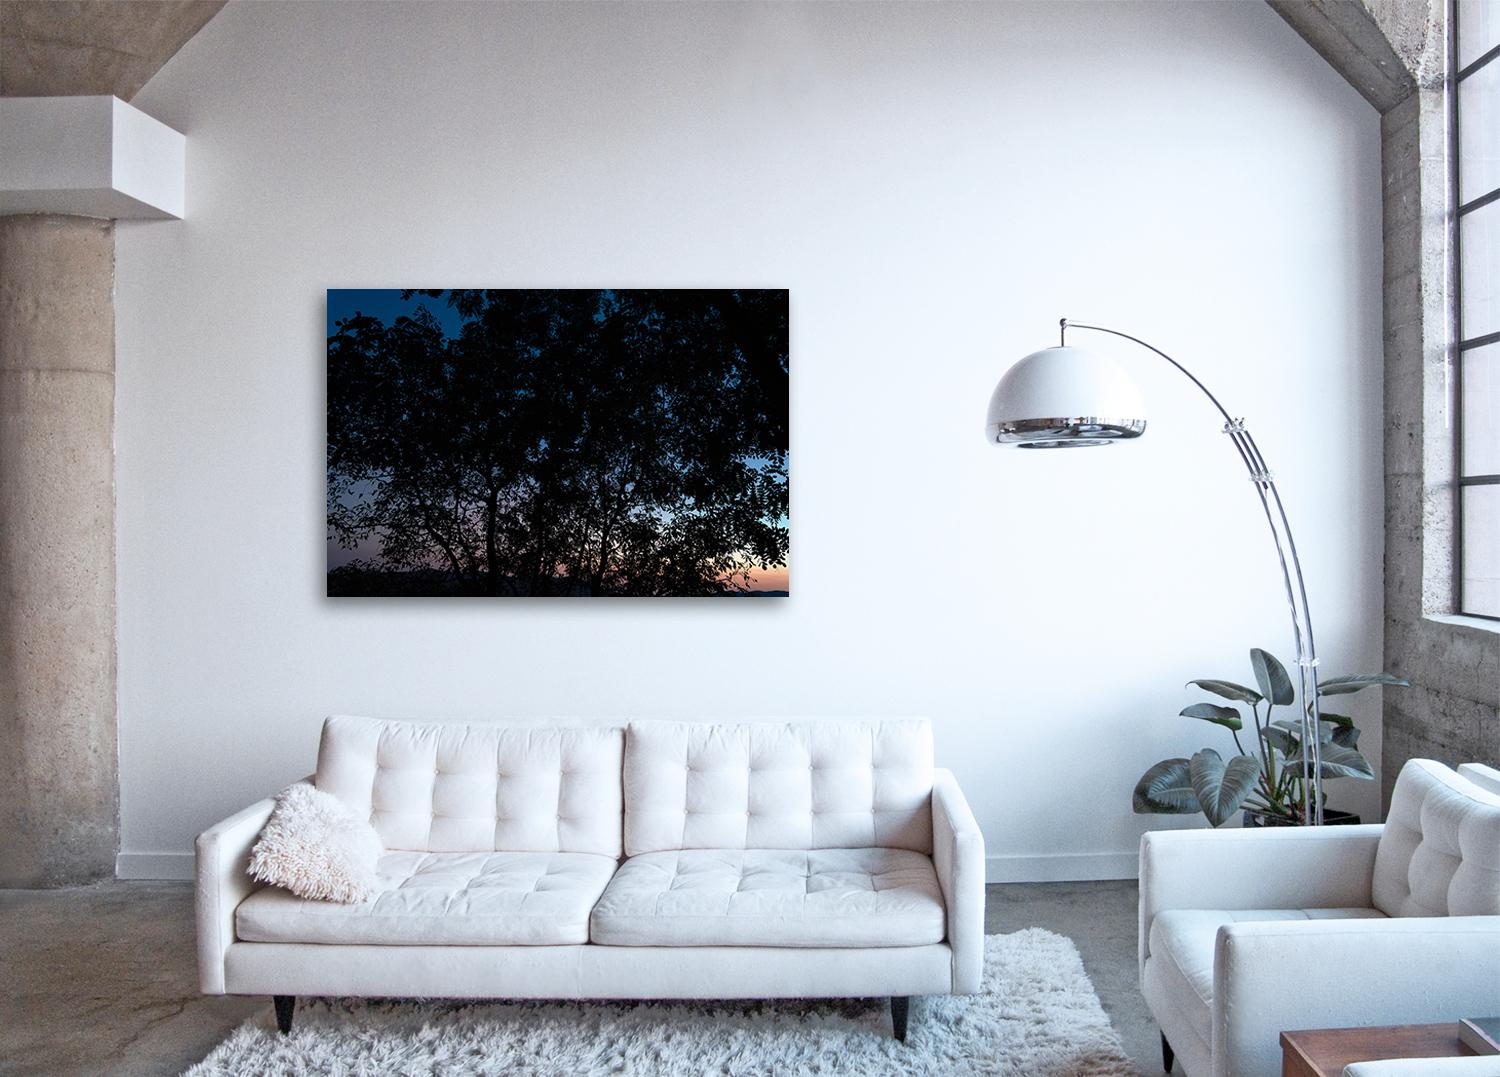 Blue Hour - large format photograph of ethereal foliage against evening sky - Black Landscape Print by Frank Schott